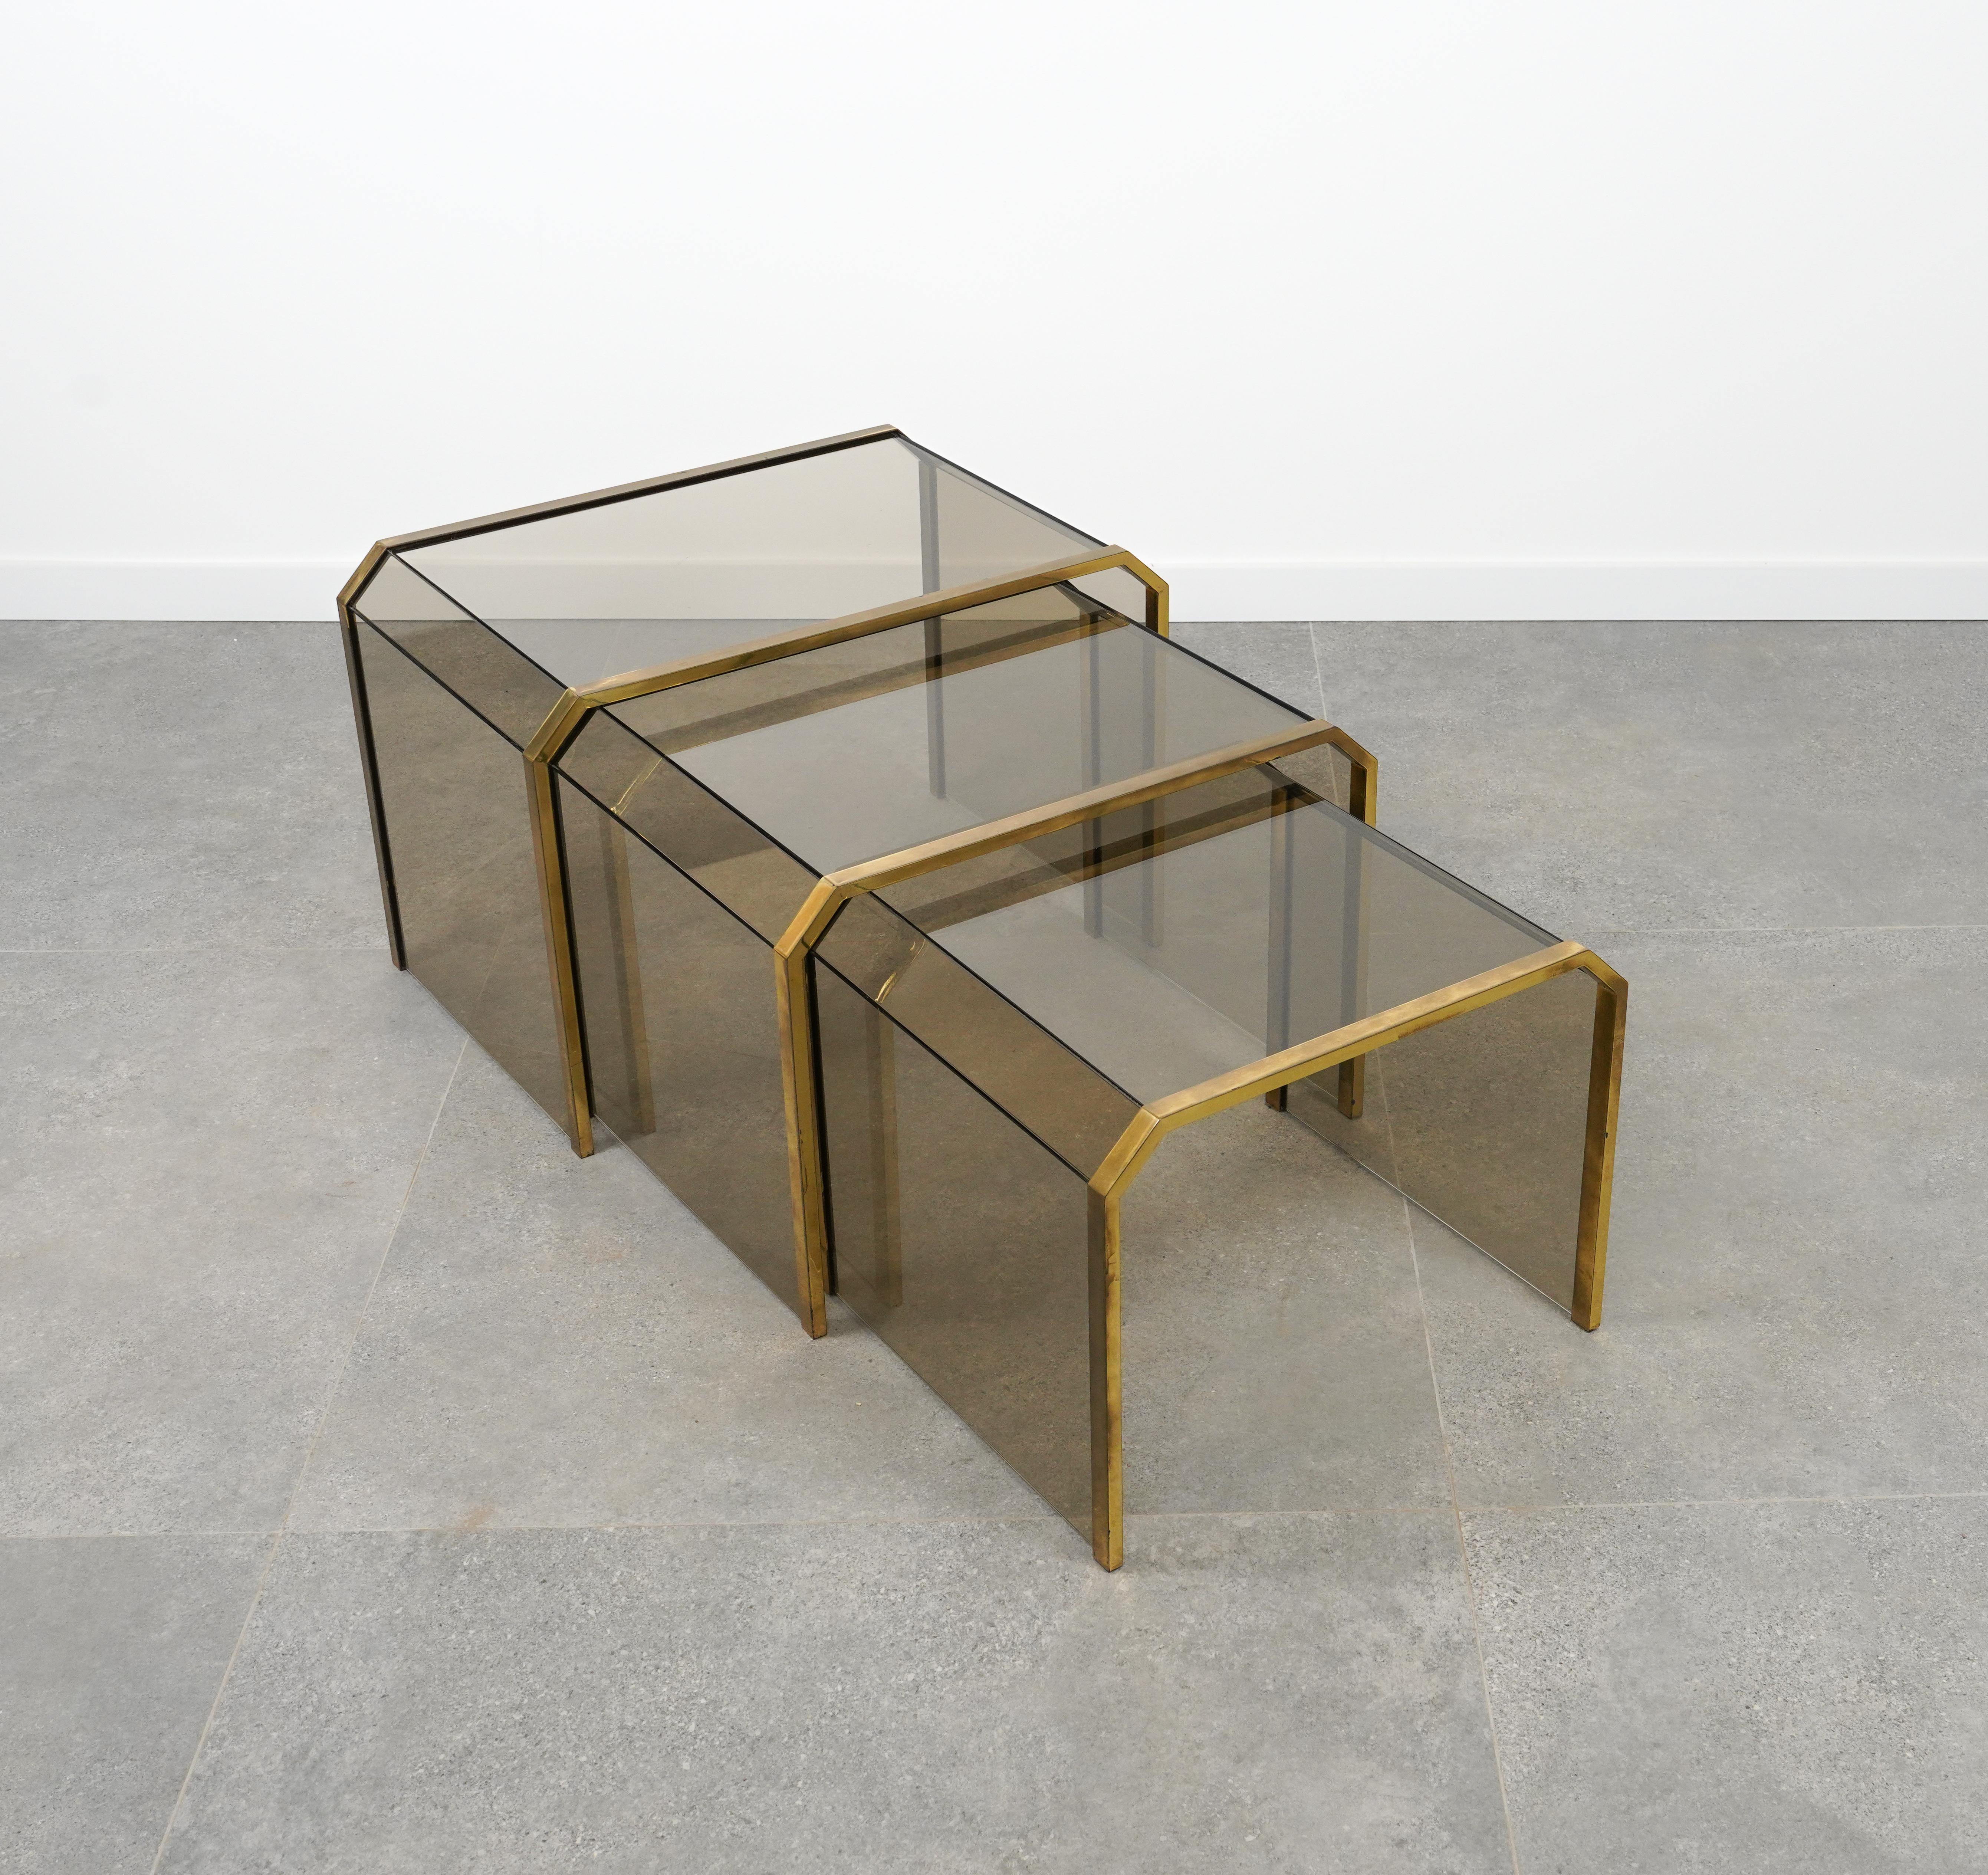 Late 20th Century Brass & Glass Set of Three Nesting Tables Gallotti & Radice Style, Italy 1970s For Sale